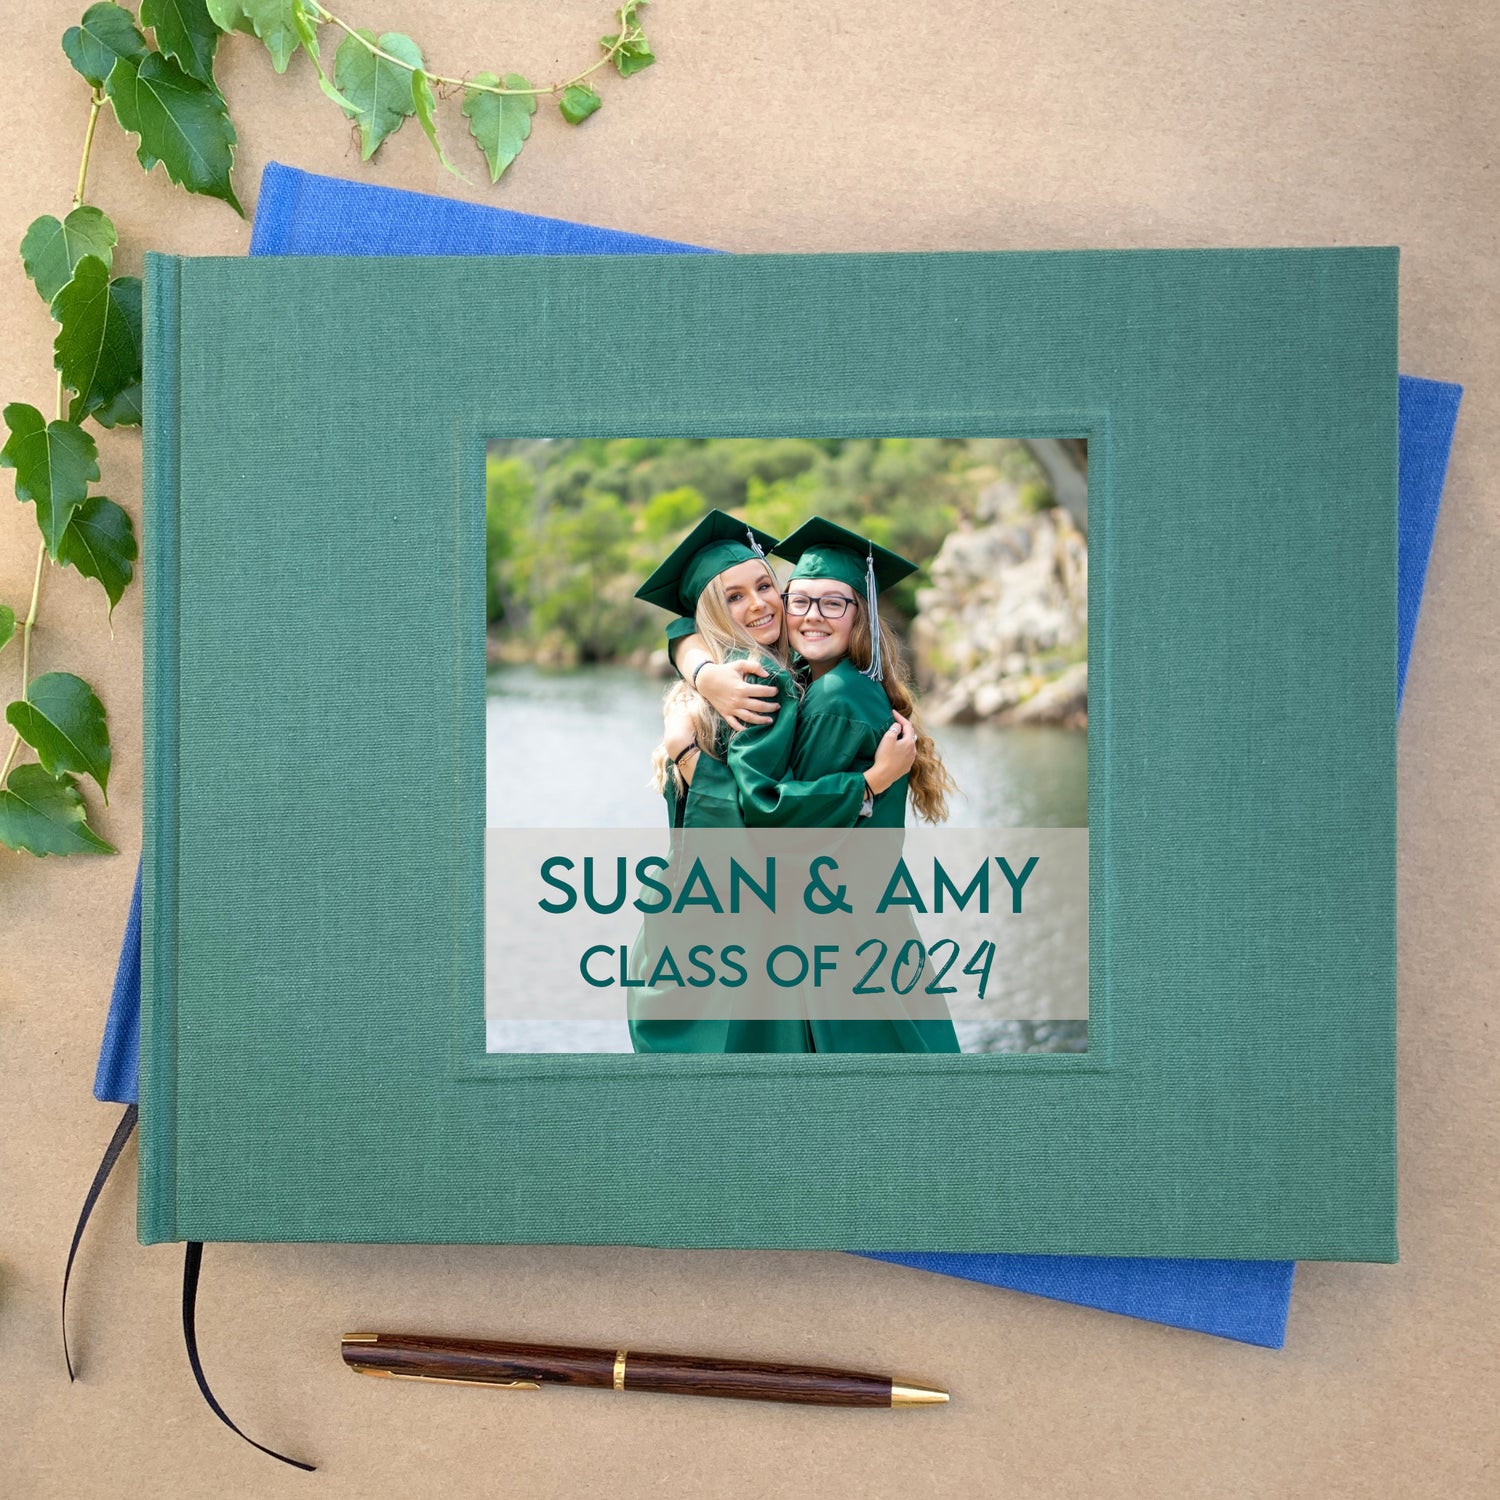 2024 Graduation Party Guest Book | Personalized Graduation Gift | Grad Party Decor | Advice, Words of Wisdom for the Class of 2024 